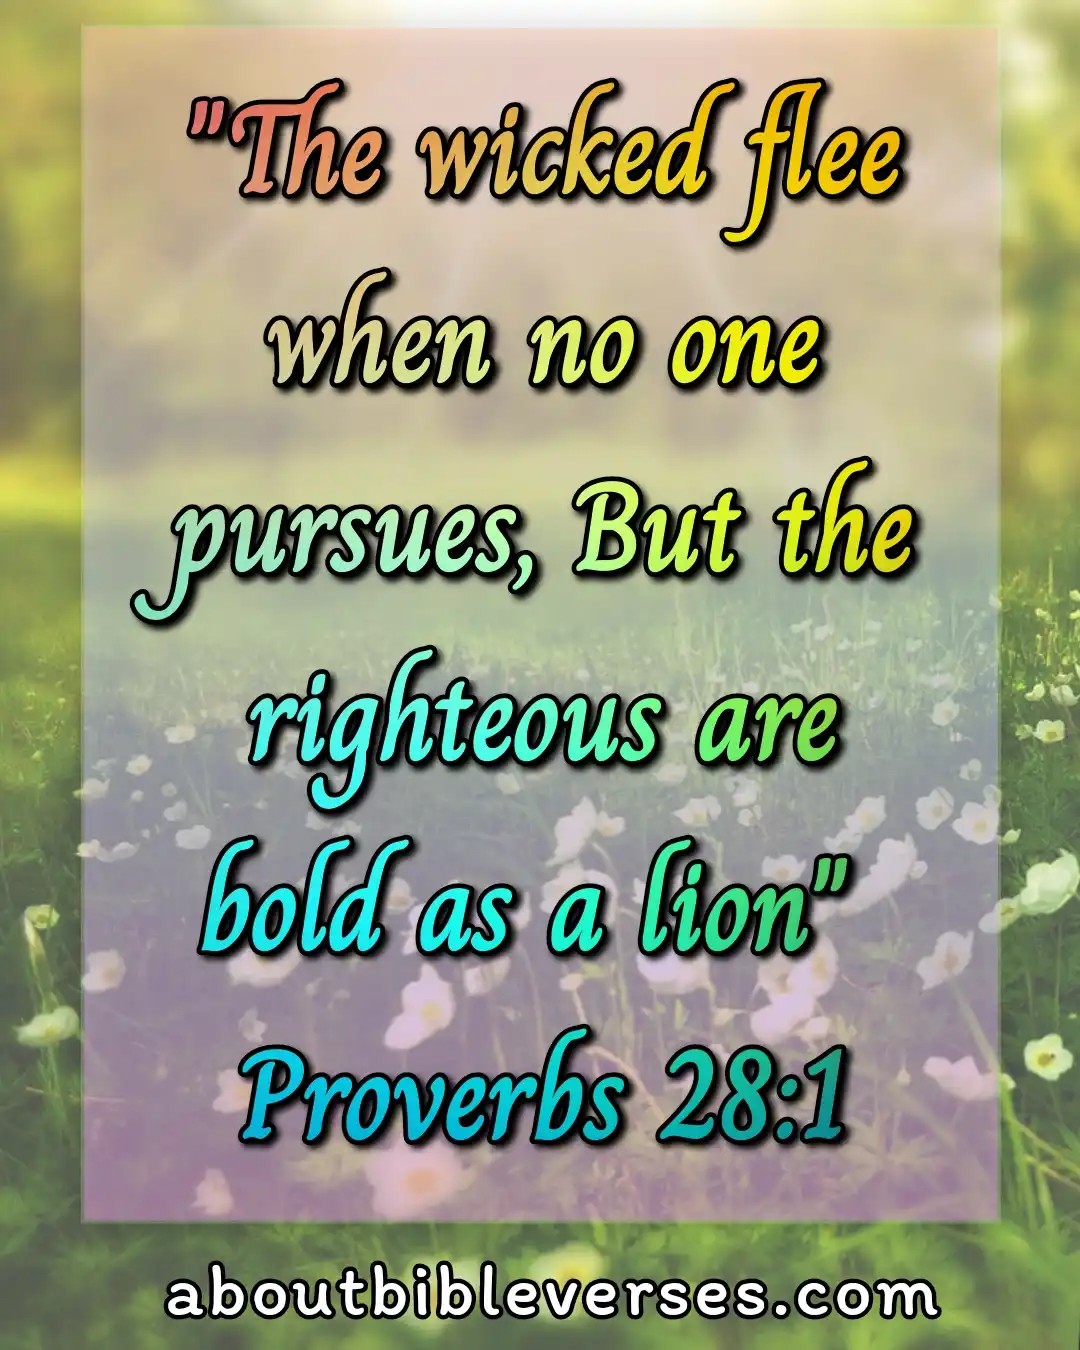 Bible Verses About Boldness (Proverbs 28:1)